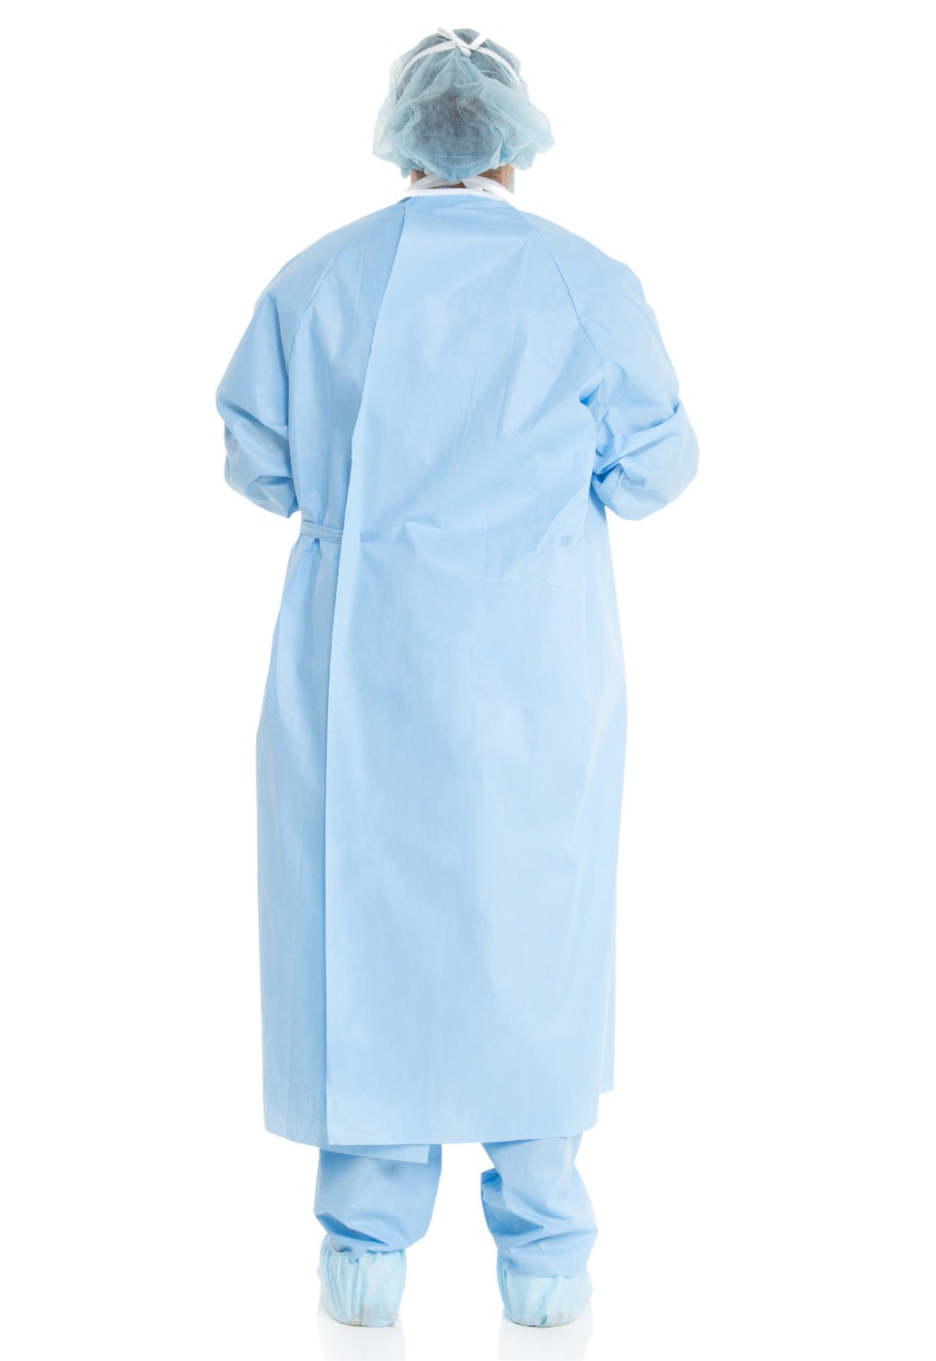 Halyard 44673 Breathable Performance Surgical Gown for sale online | eBay